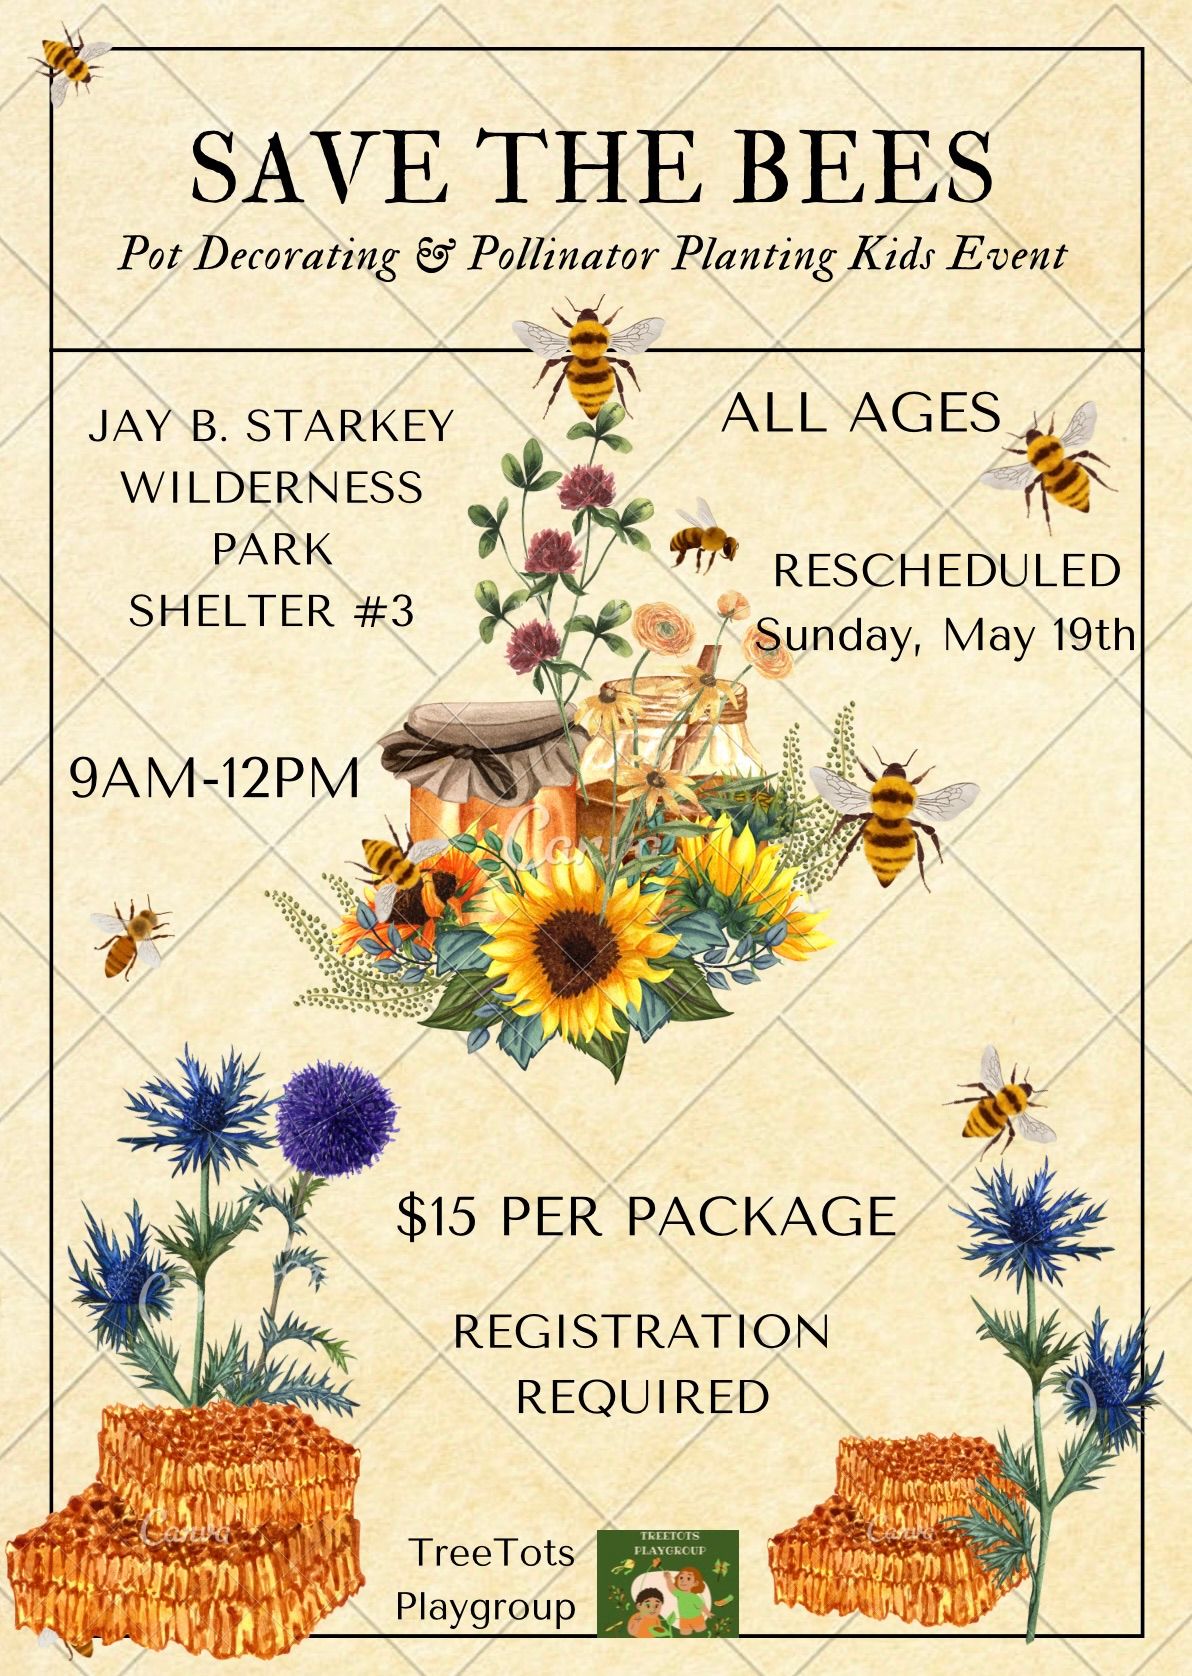 Save the Bees Kids Event